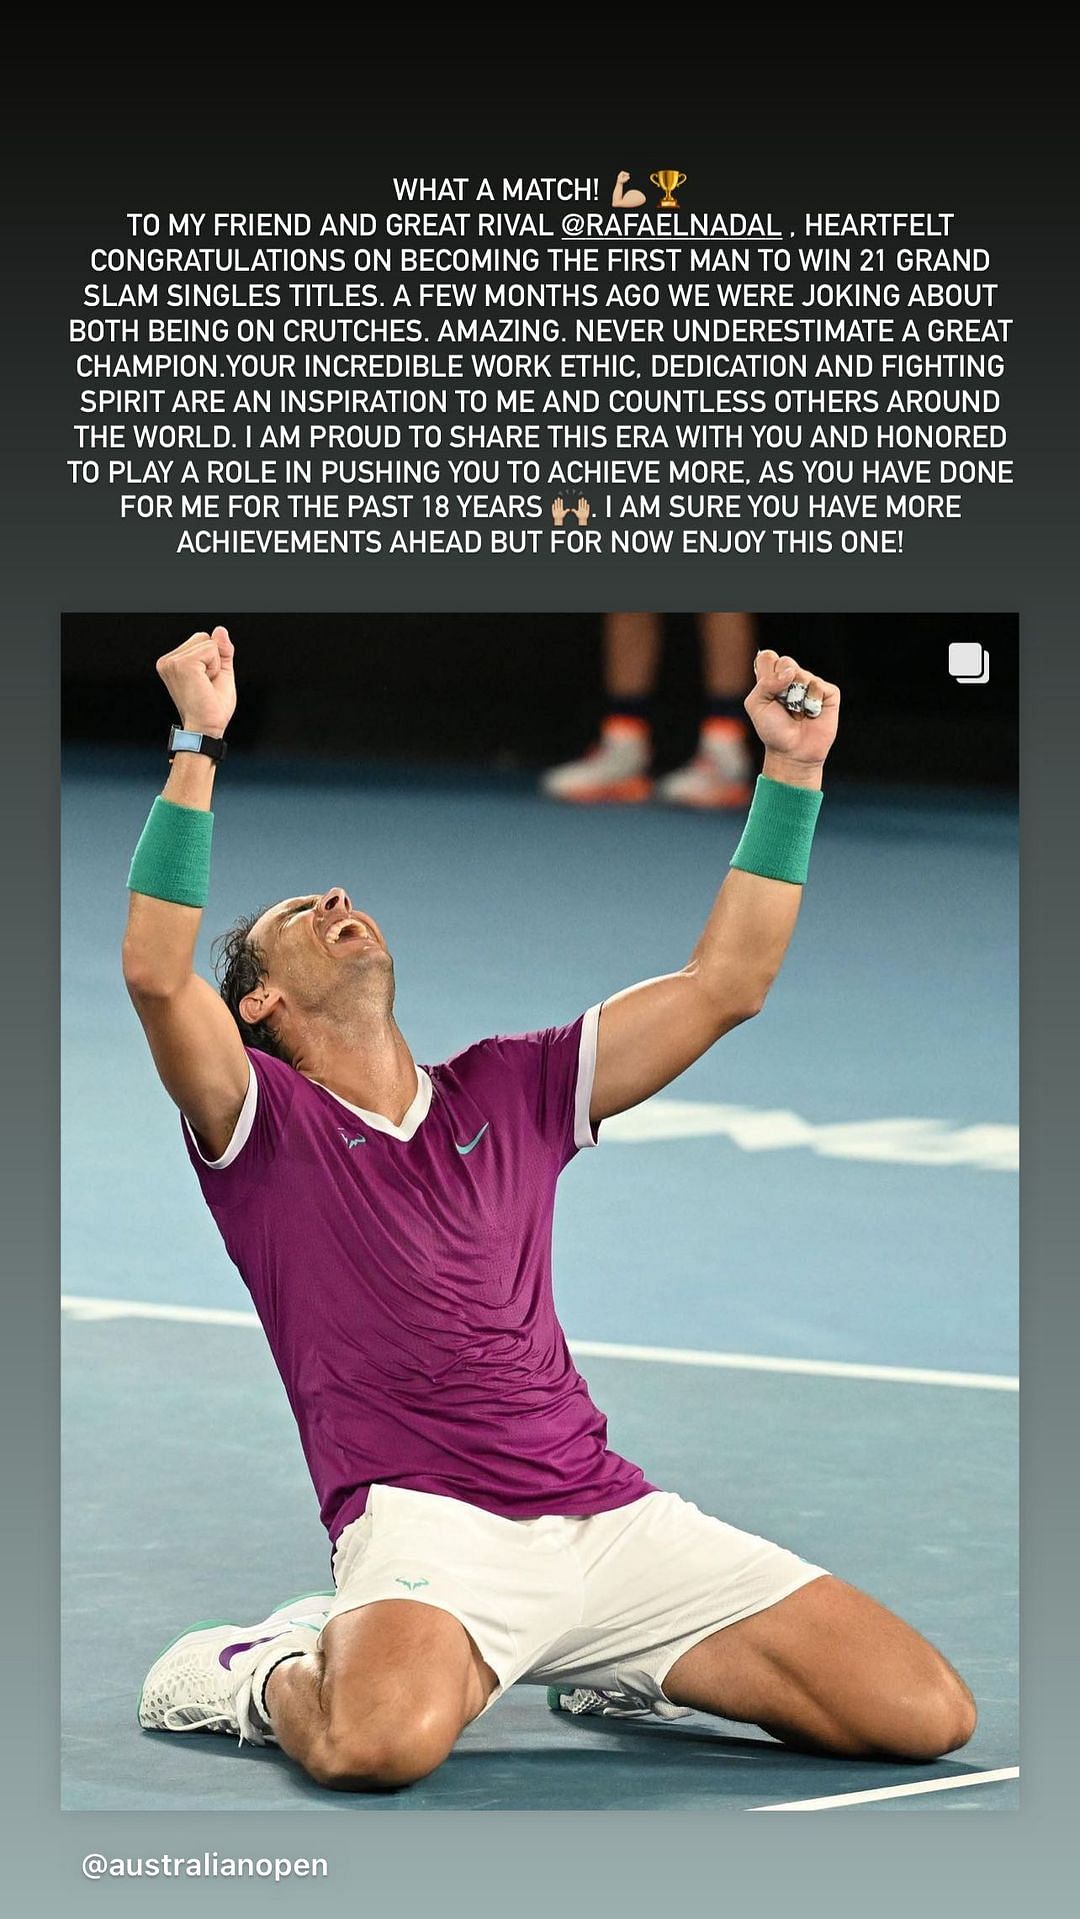 Rafael Nadal has become the first male tennis player to win 21 Grand Slam titles.